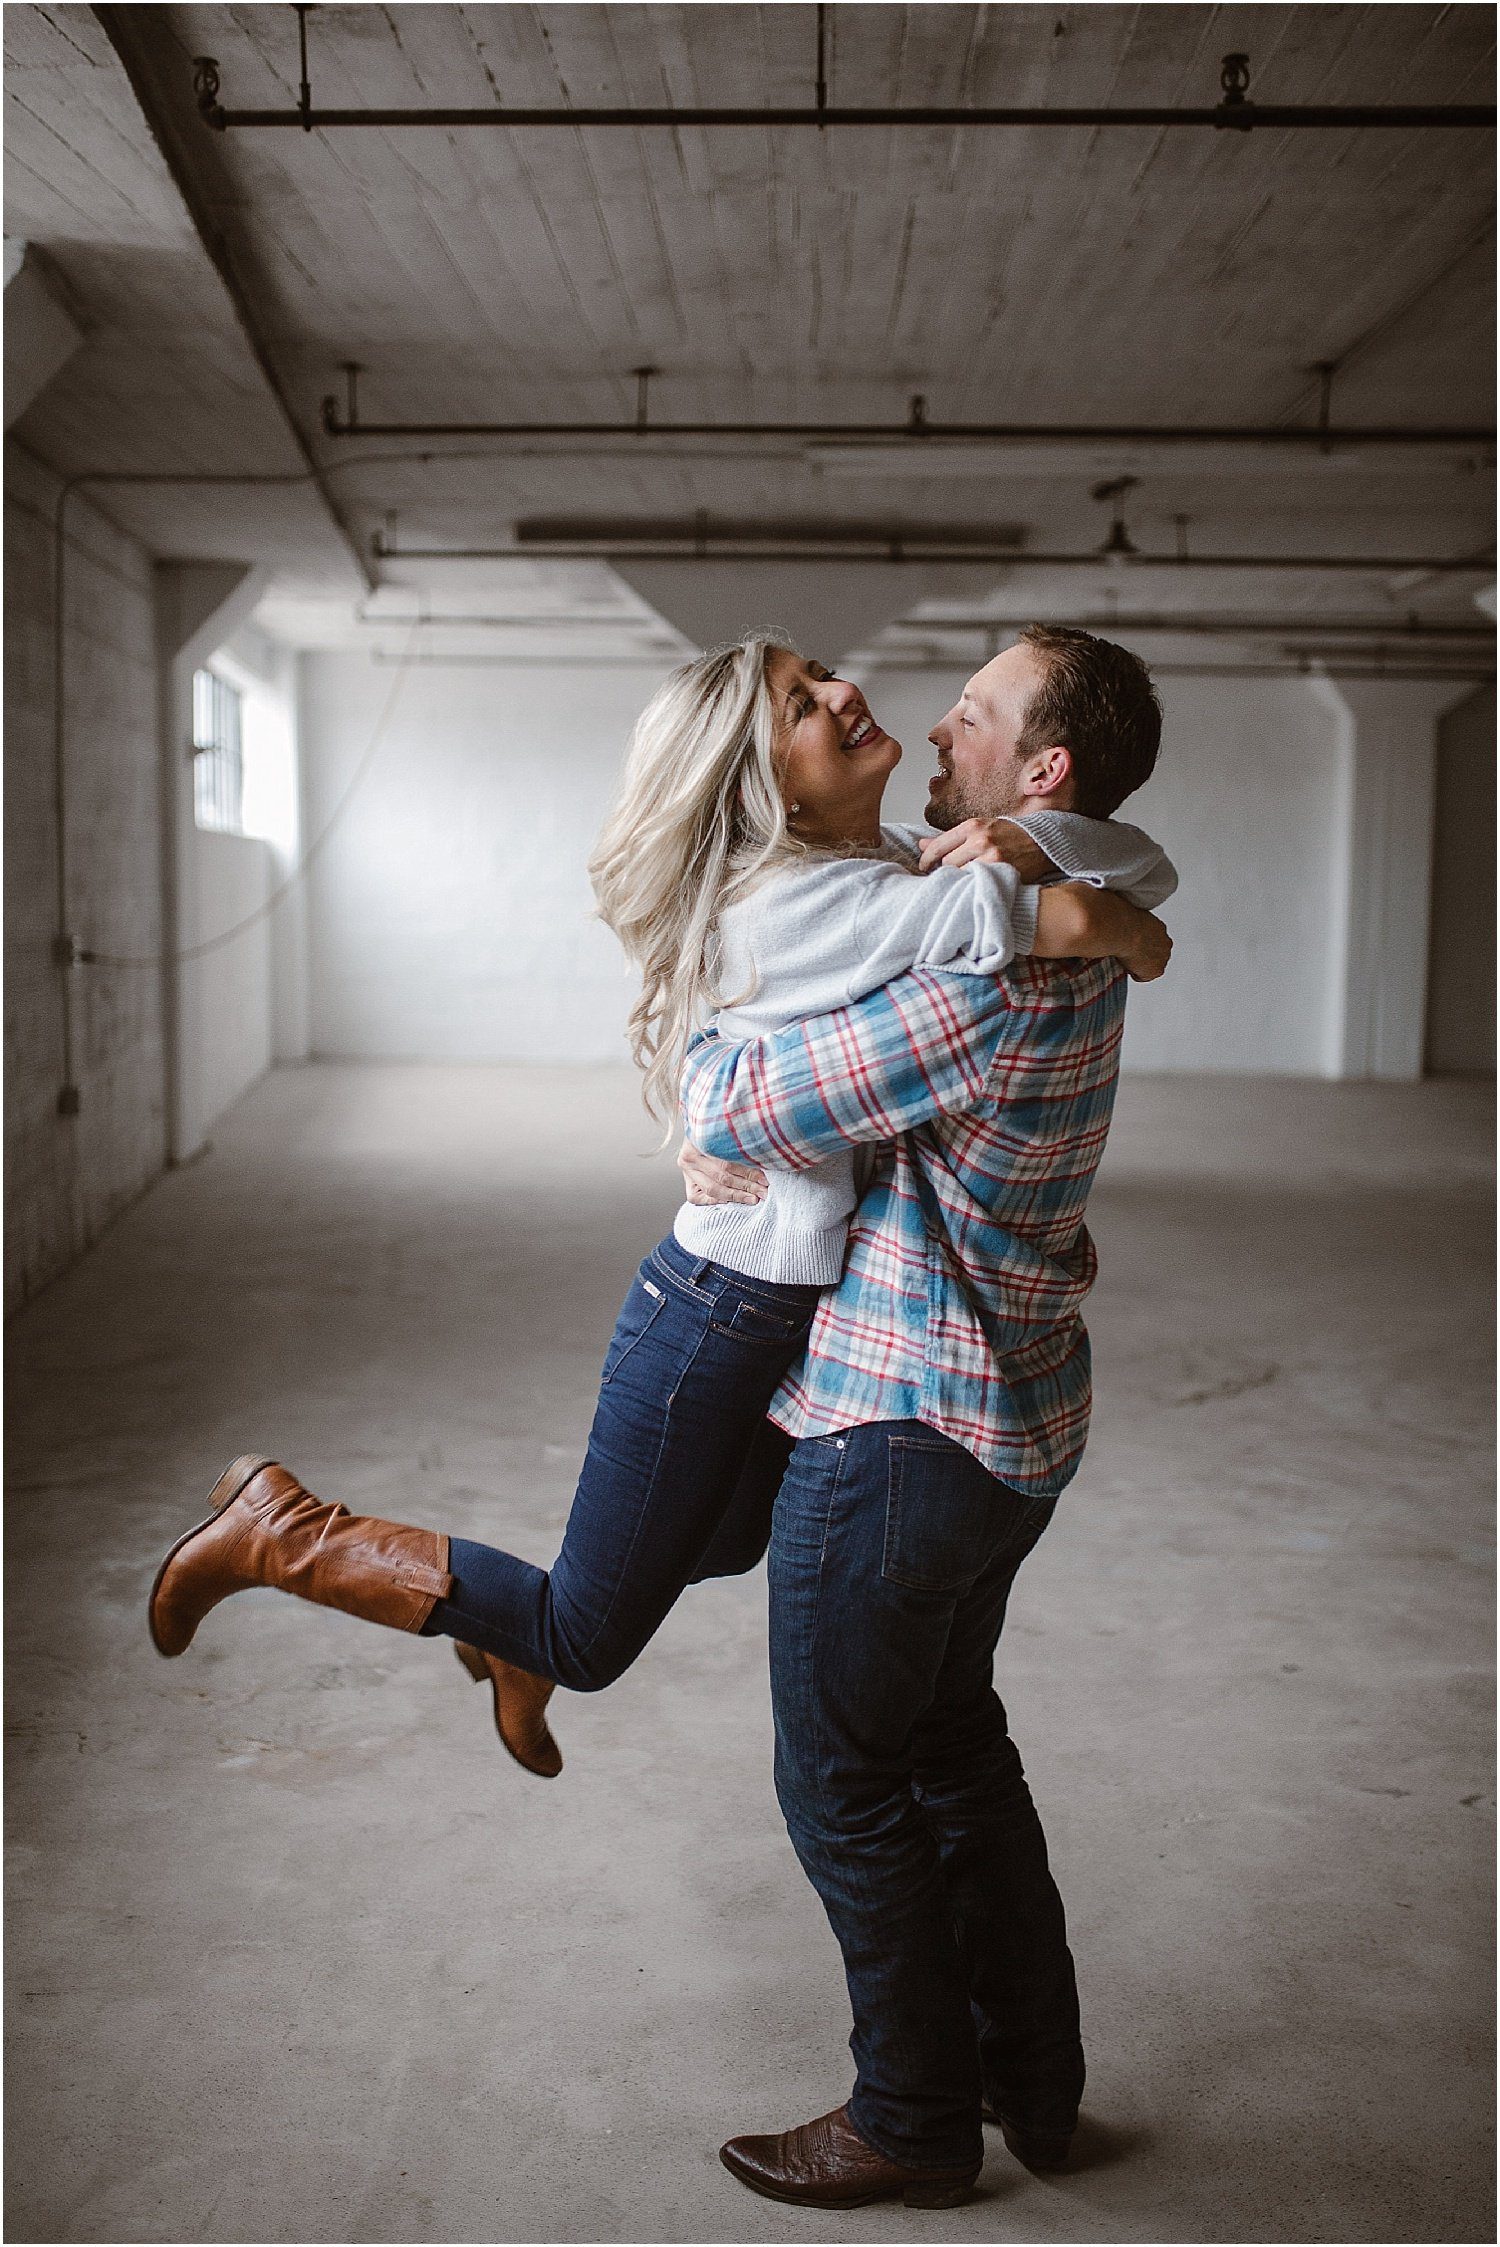 Industrial Engagement Photos in Knoxville | Photographed by Erin Morrison Photography | https://erinmorrisonphotography.com/rainy-day-industrial-engagement-photos-knoxville/